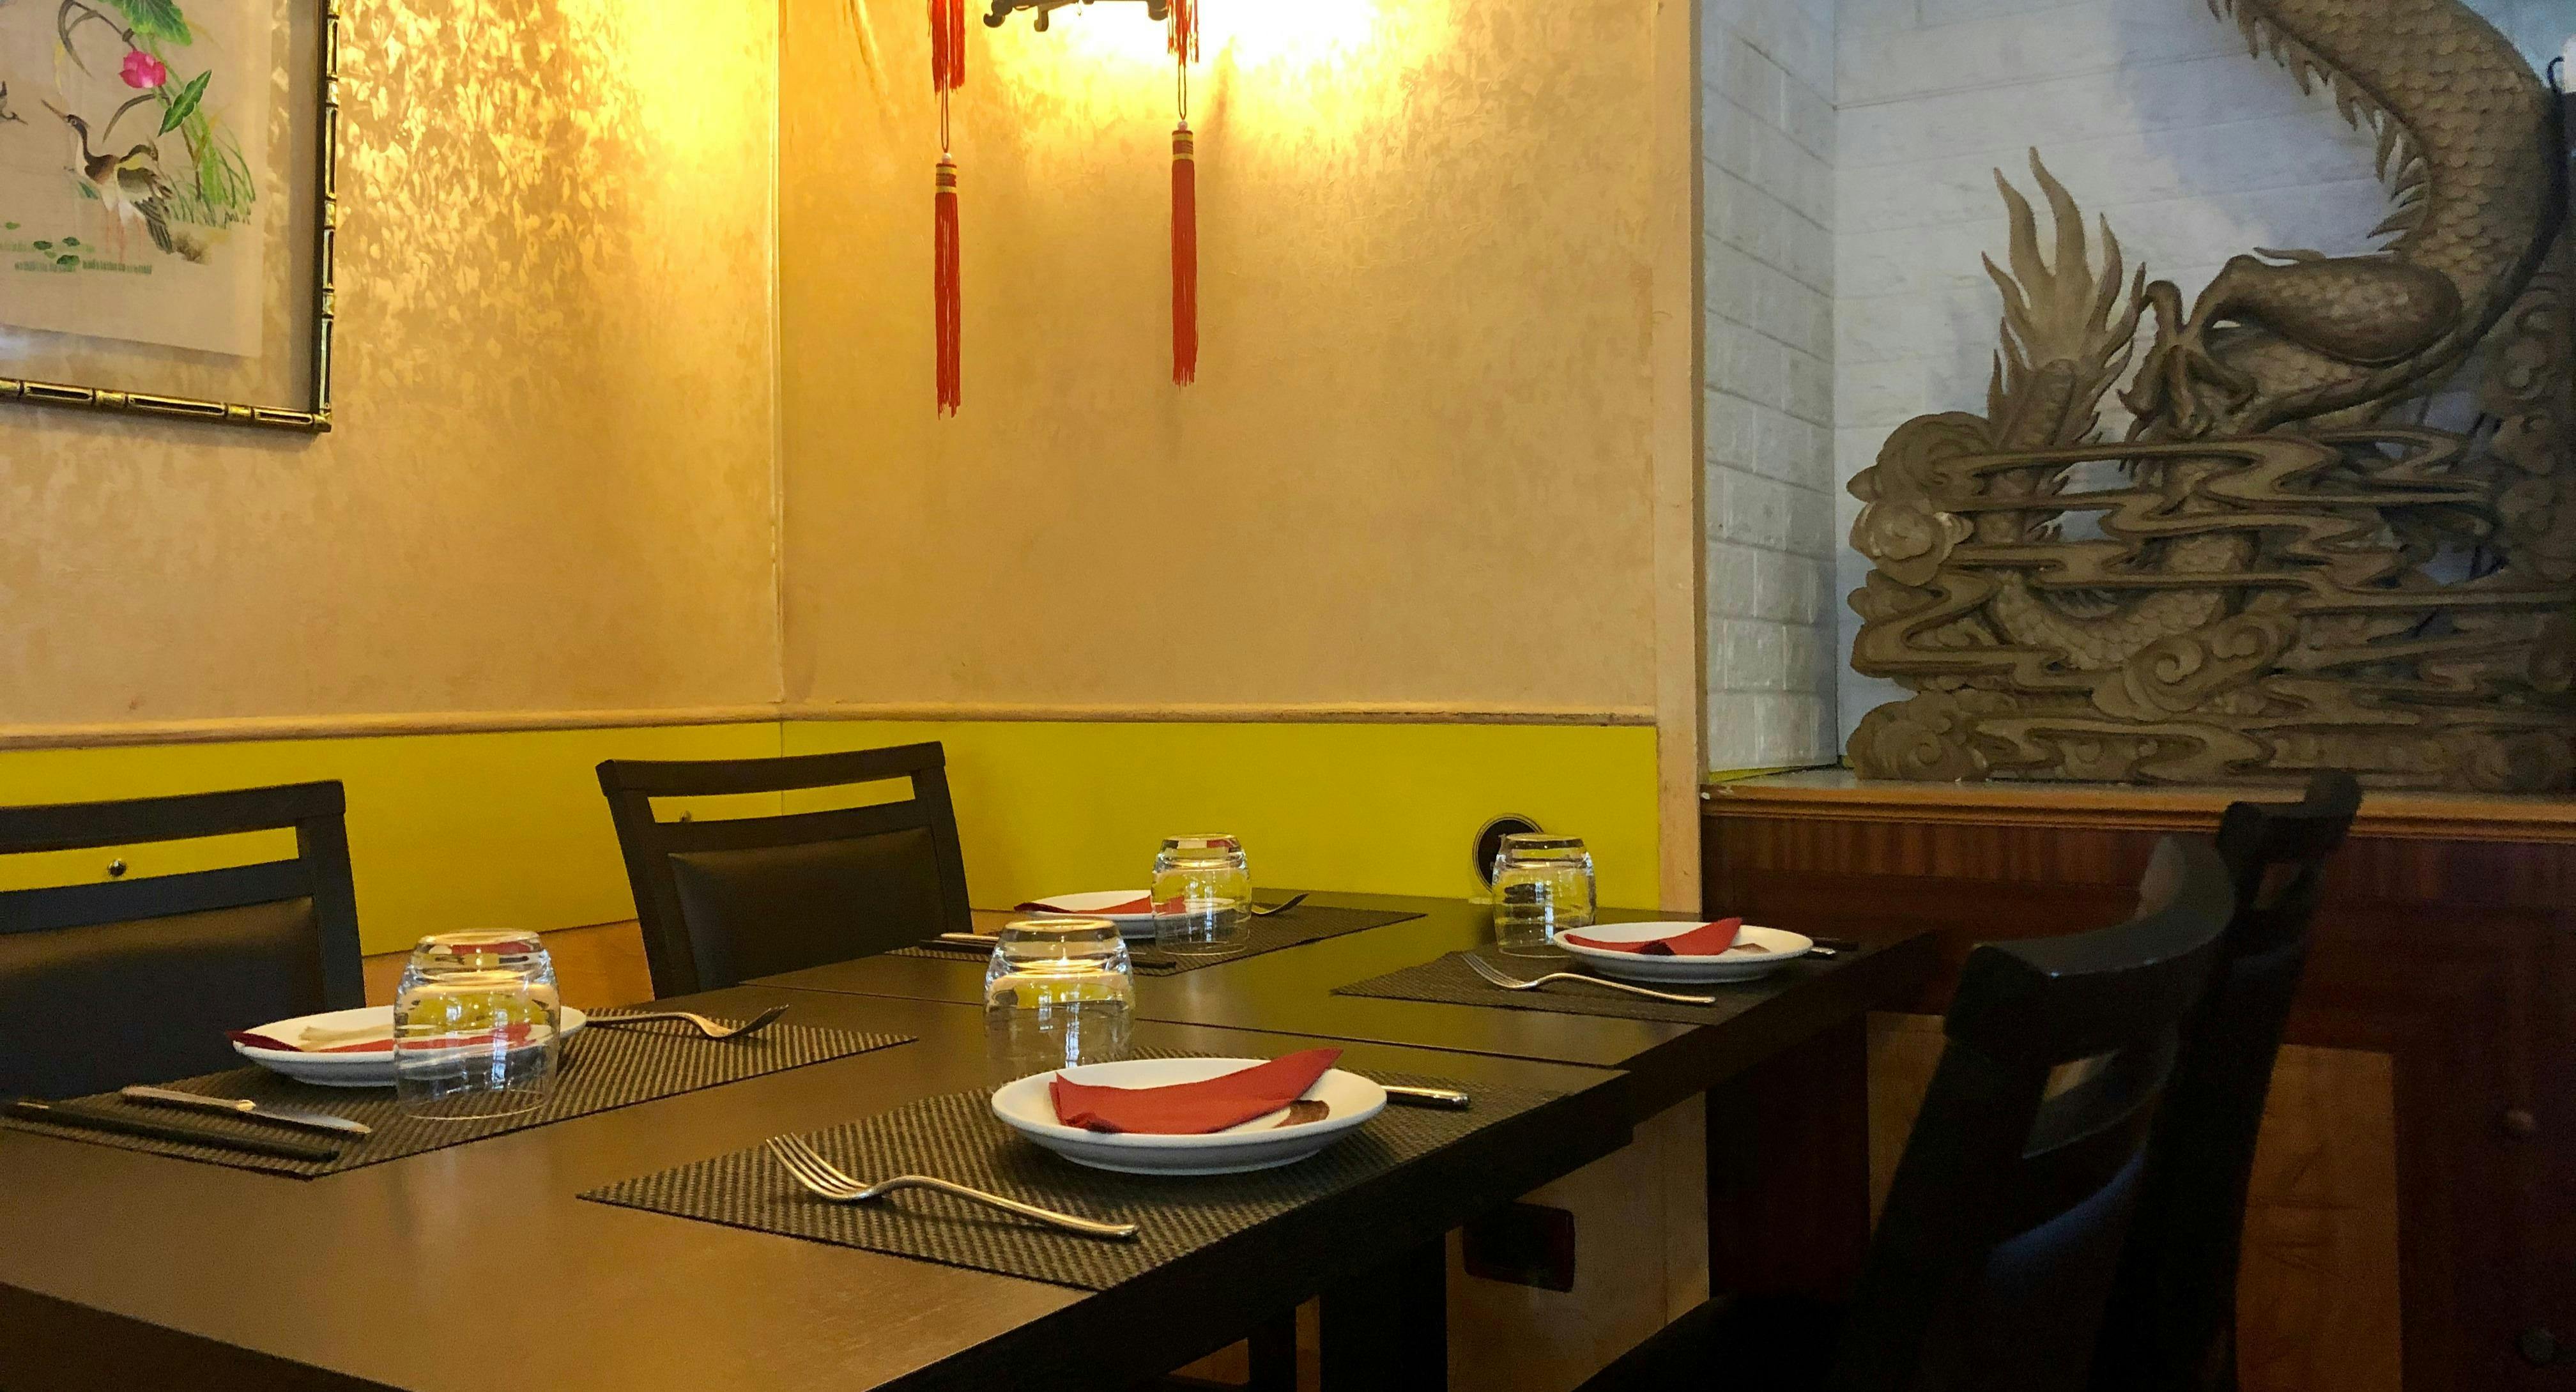 Photo of restaurant HongKong Palermo Ristorante Cinese & Giapponese in City Centre, Palermo